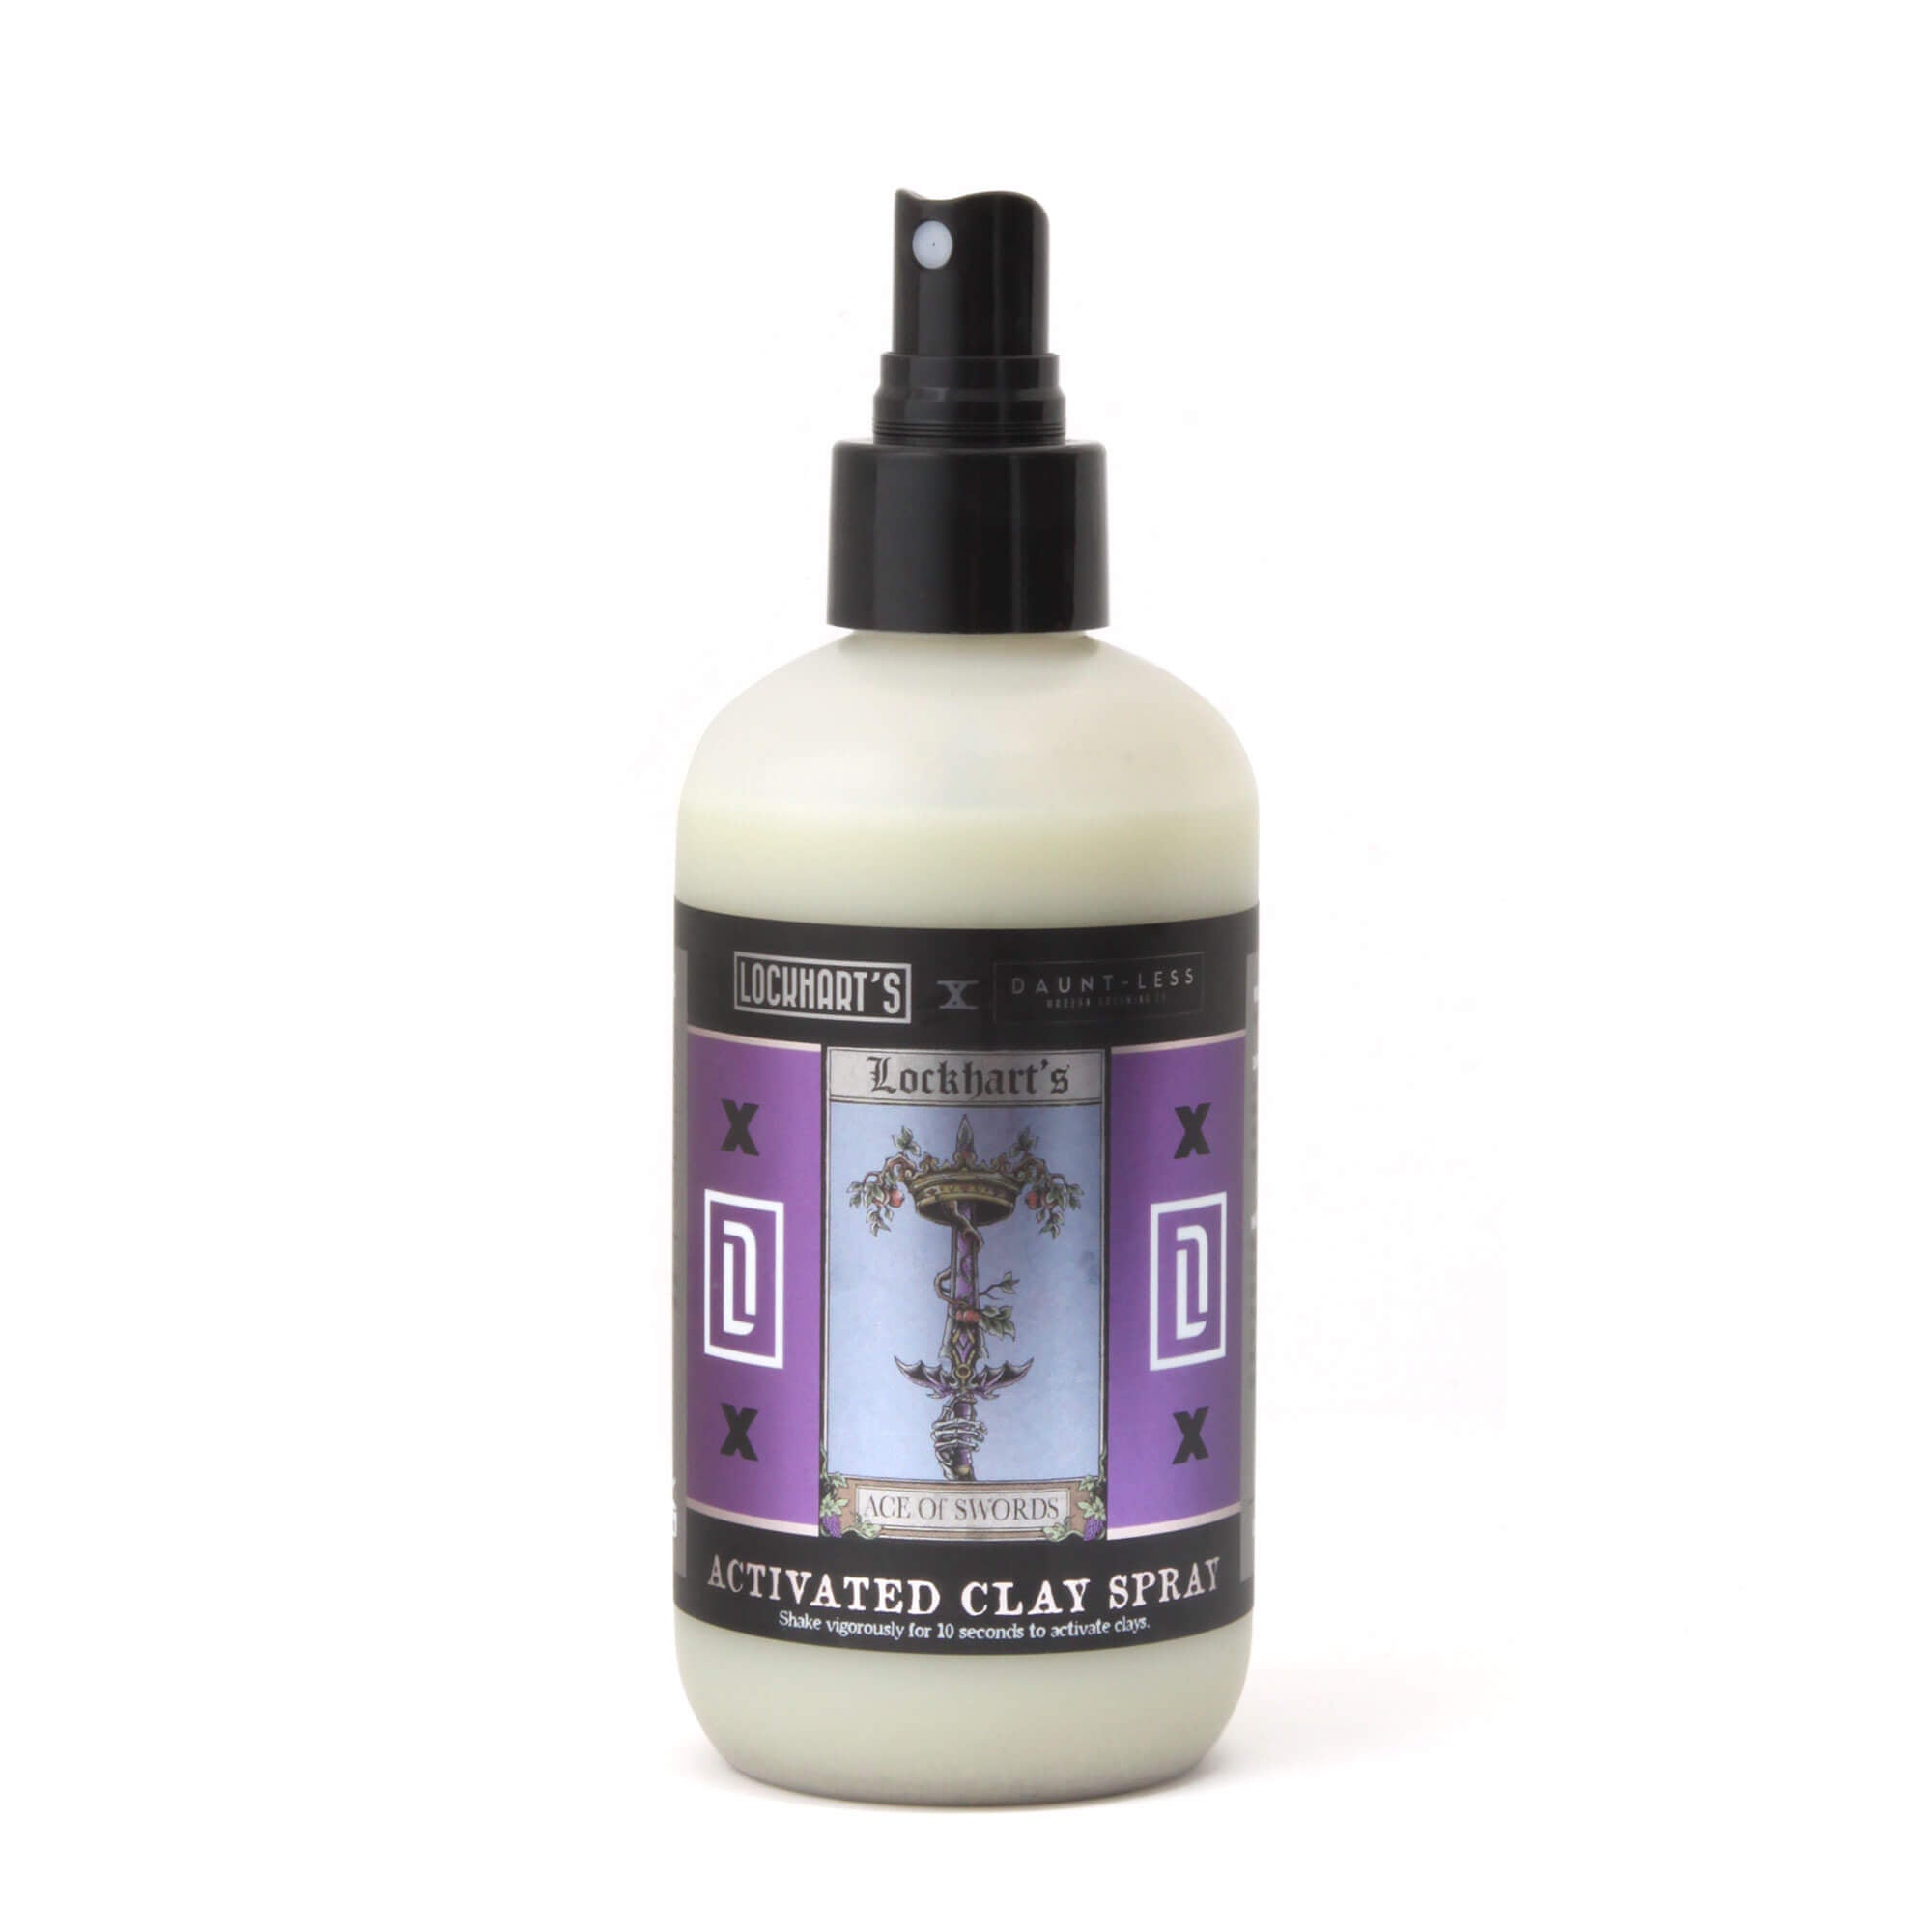 Lockhart's X Dauntless Ace Of Swords Activated Clay Spray